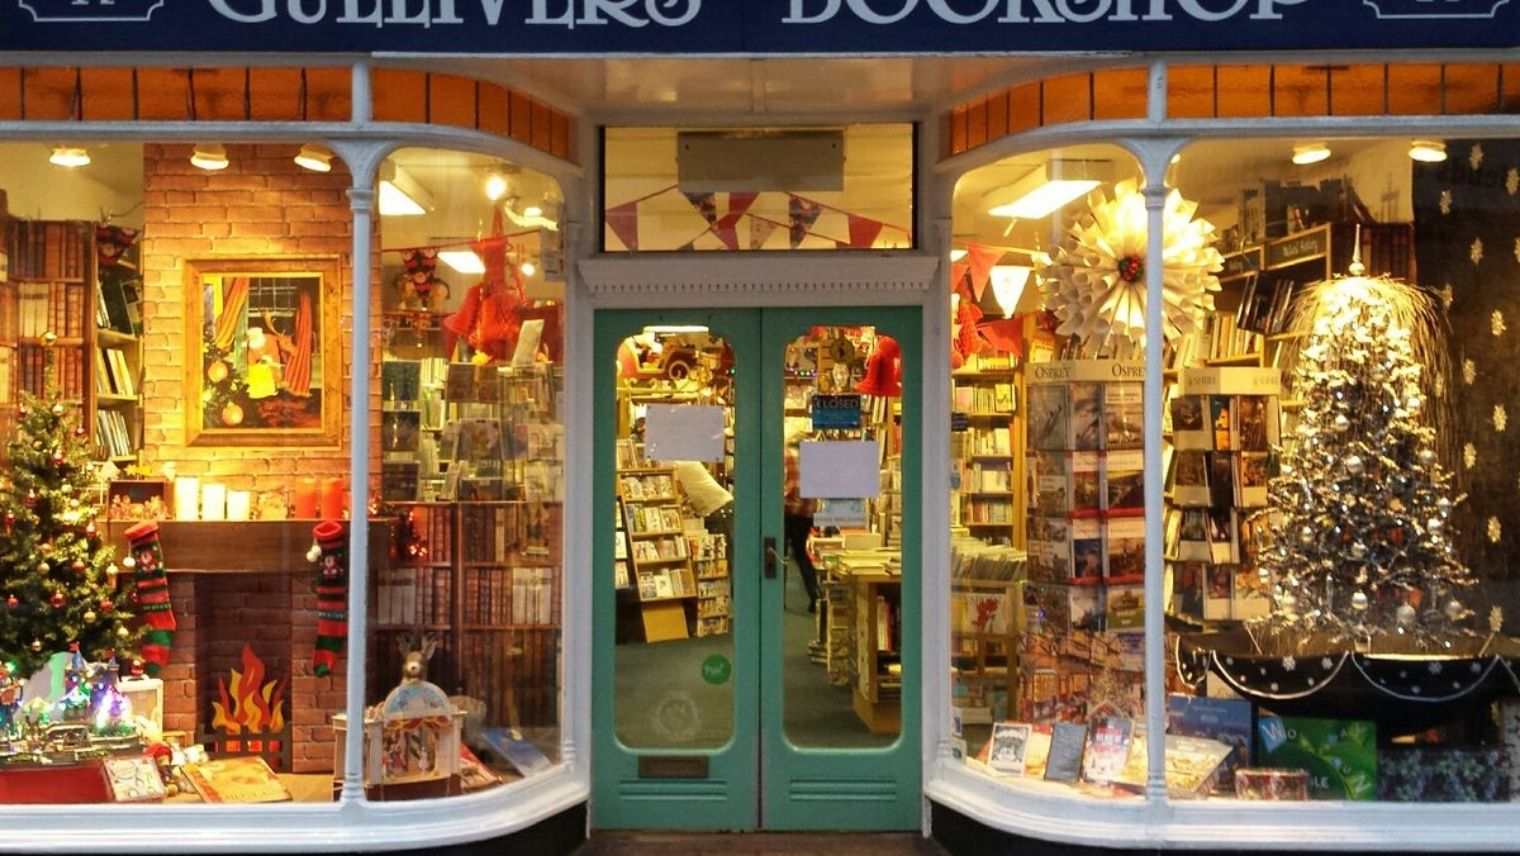 Exterior and Christmas display at Gulliver's Bookshop, Wimbourne 